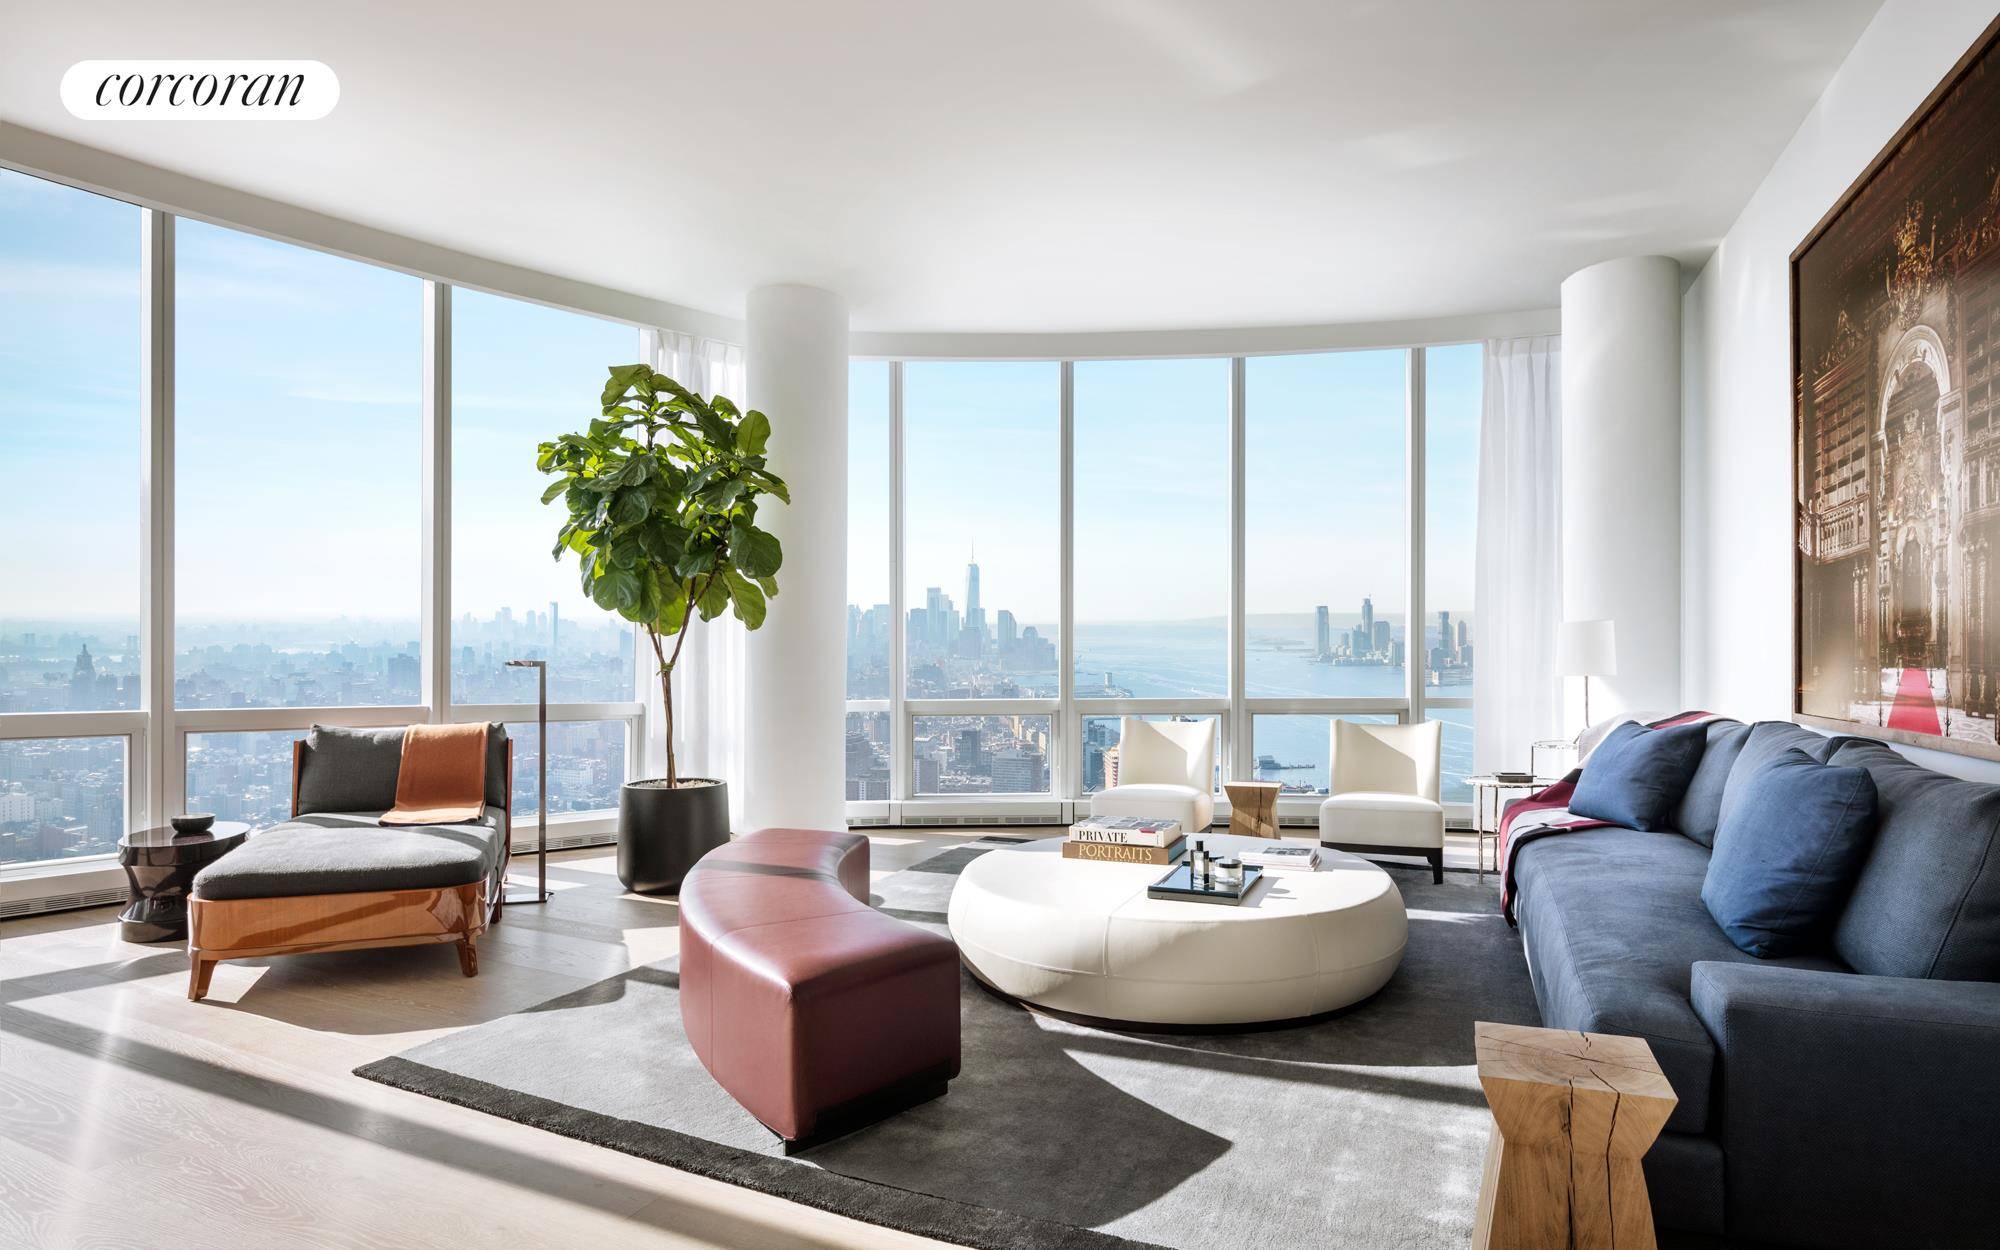 Stunning 3343sqft penthouse on the in demand Southeast corner of Fifteen Hudson Yards, where the views for miles extend past the Hudson River, Statue of Liberty, Freedom Tower and East ...